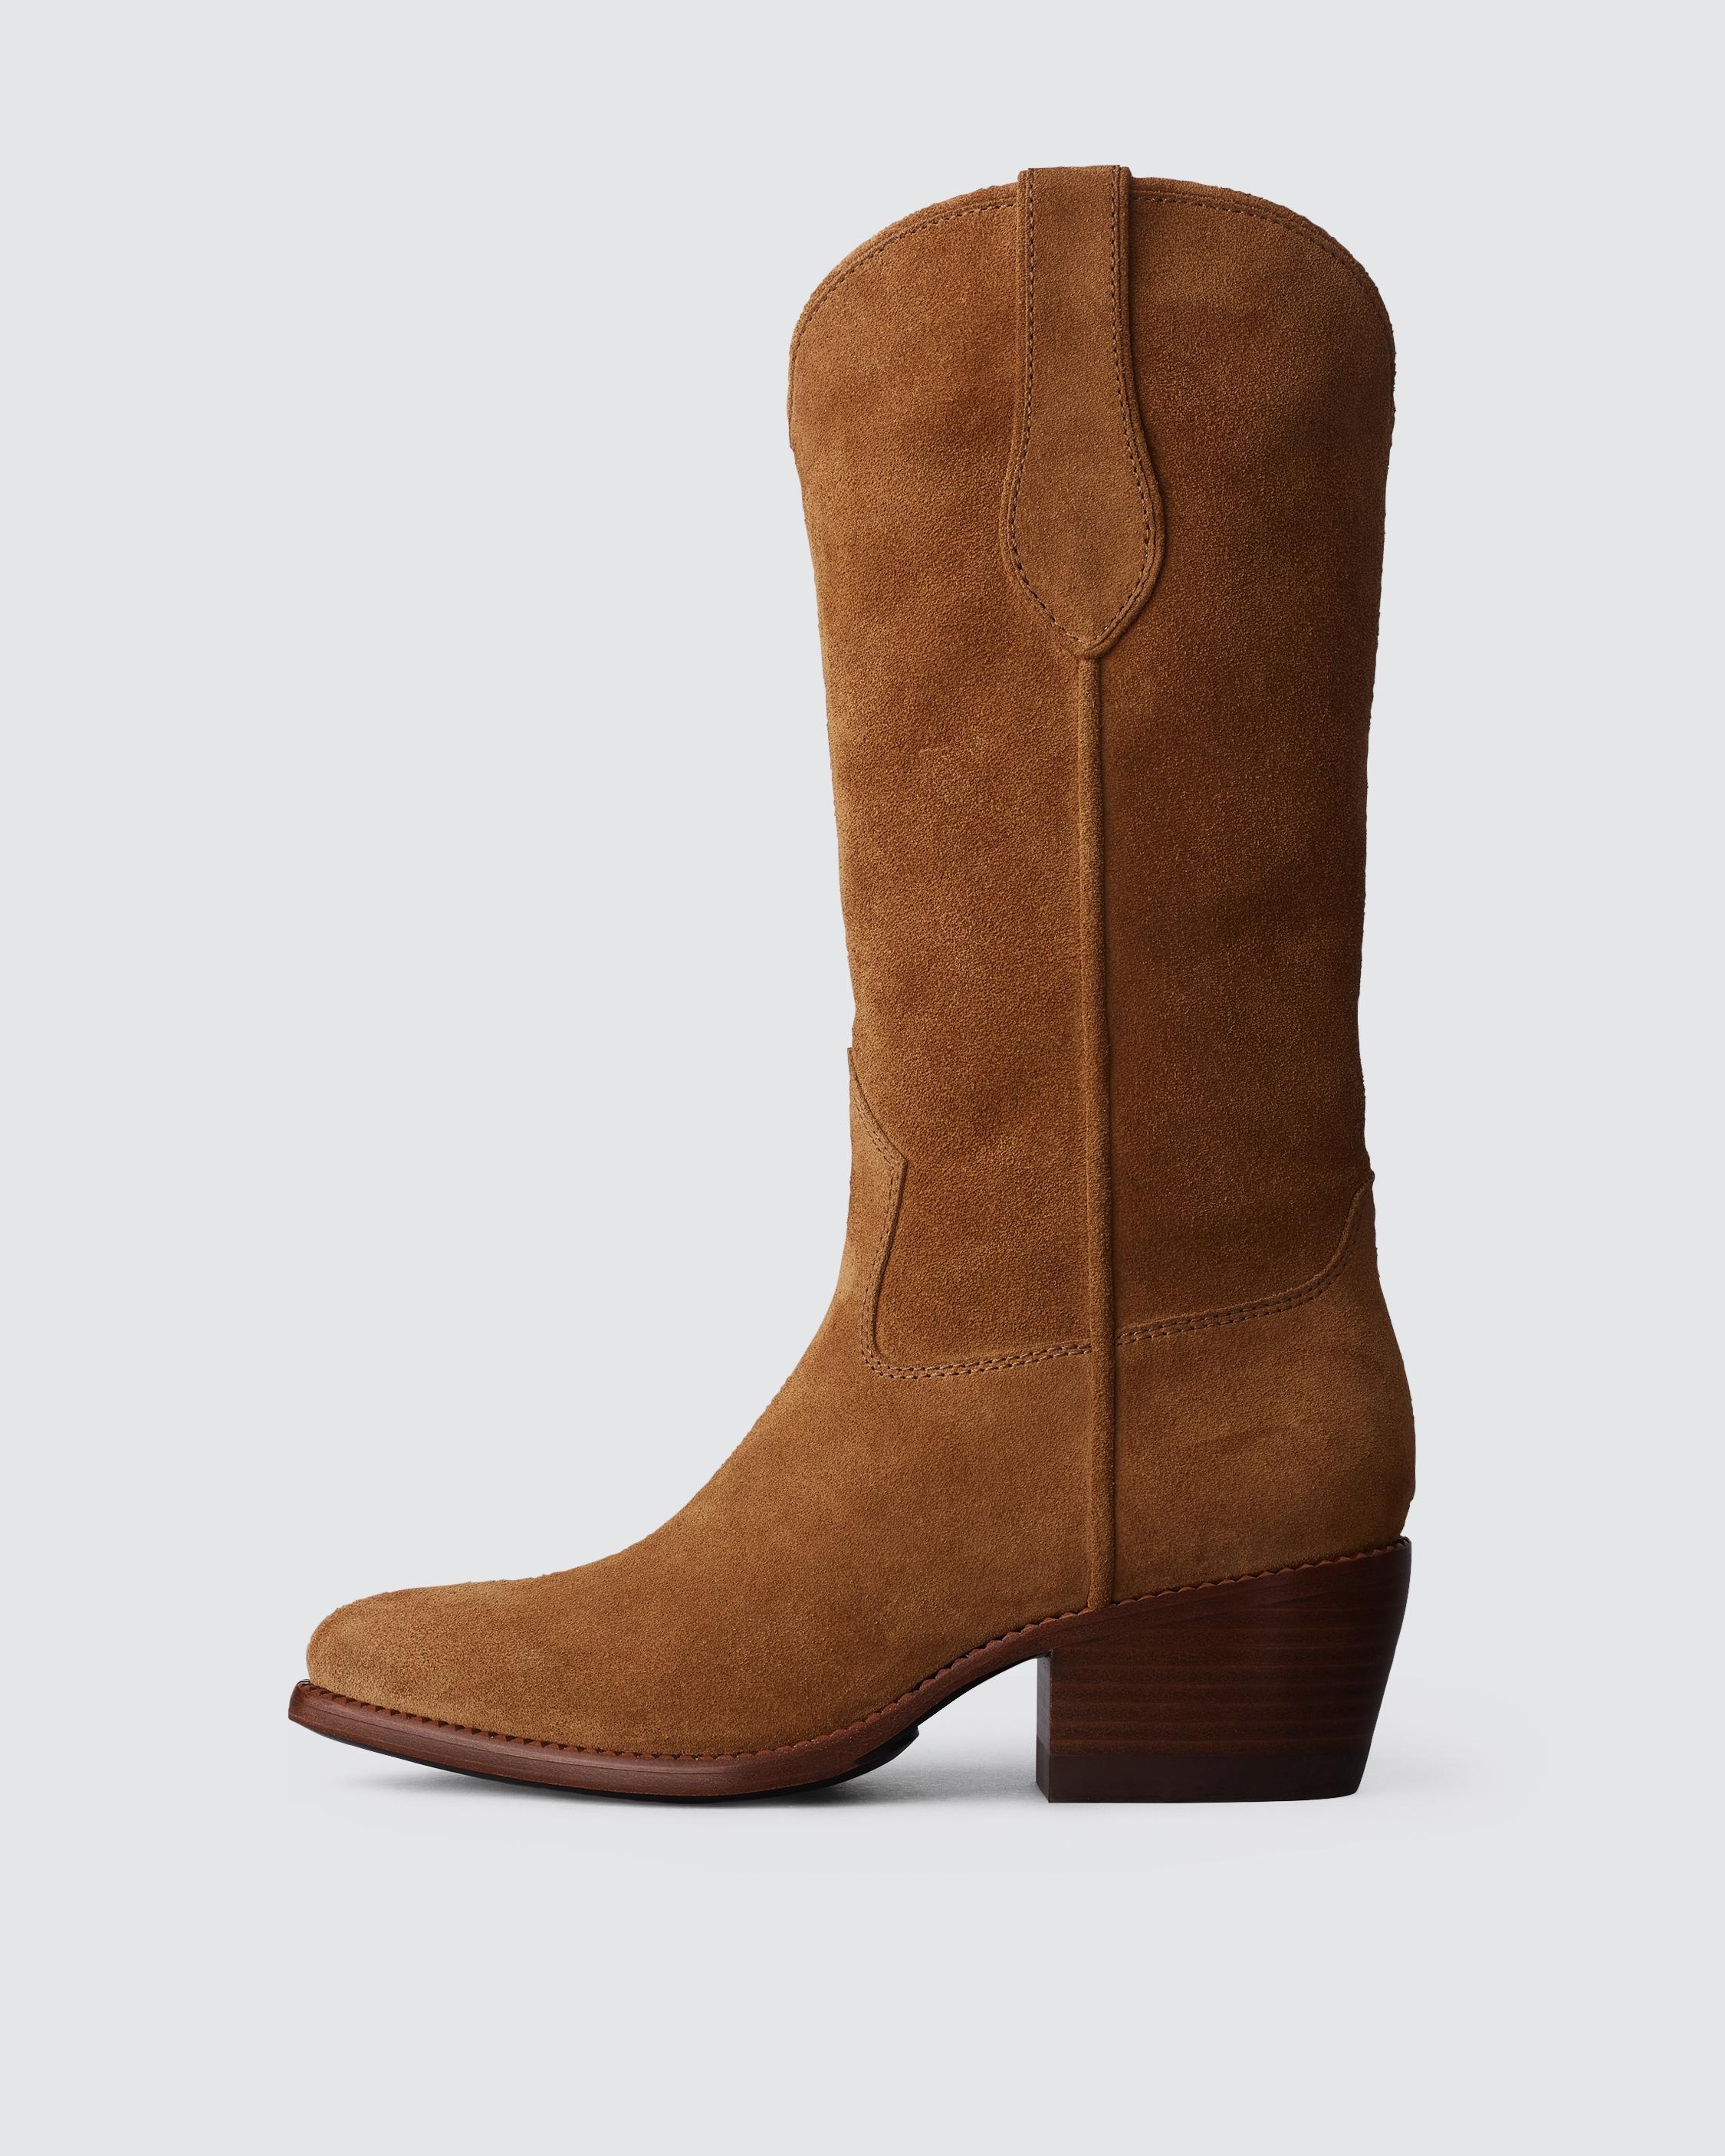 Rb Cowboy Boot - Suede
Heeled Boot - 1